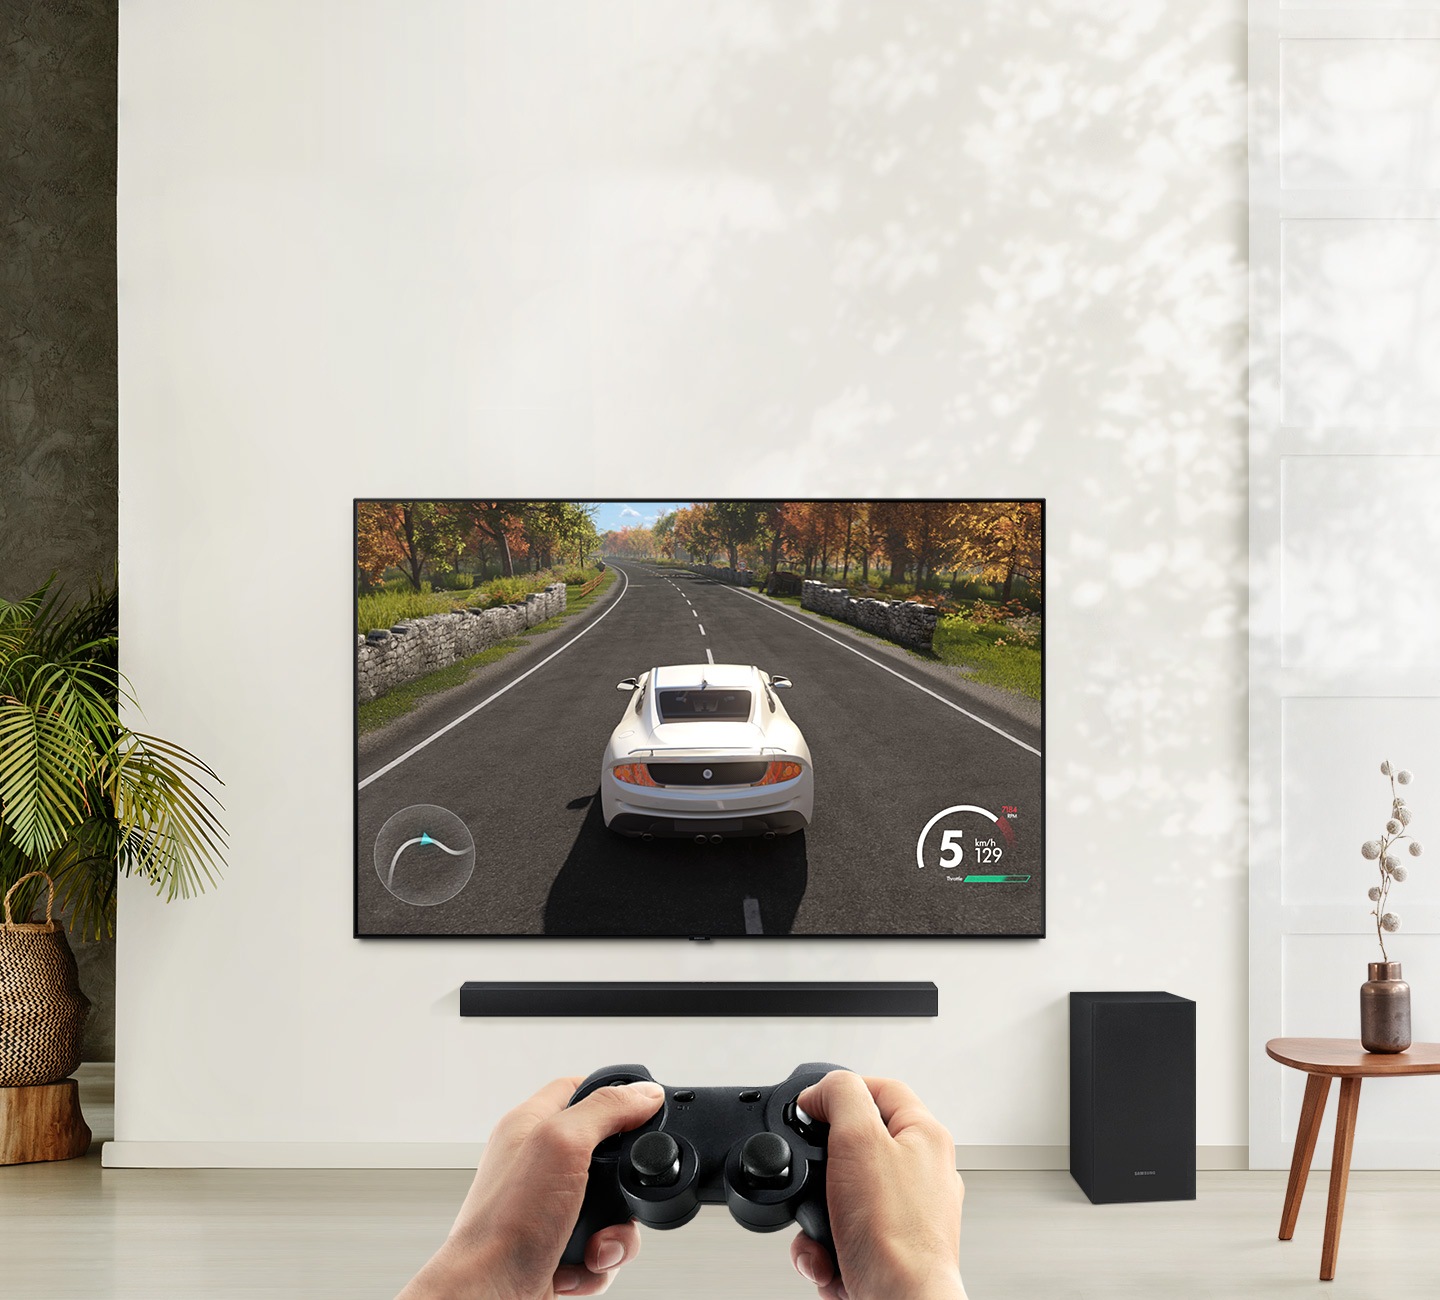 A user is enjoying soundbar’s Game Mode while playing a racing game on their TV connected to soundbar and subwoofer.